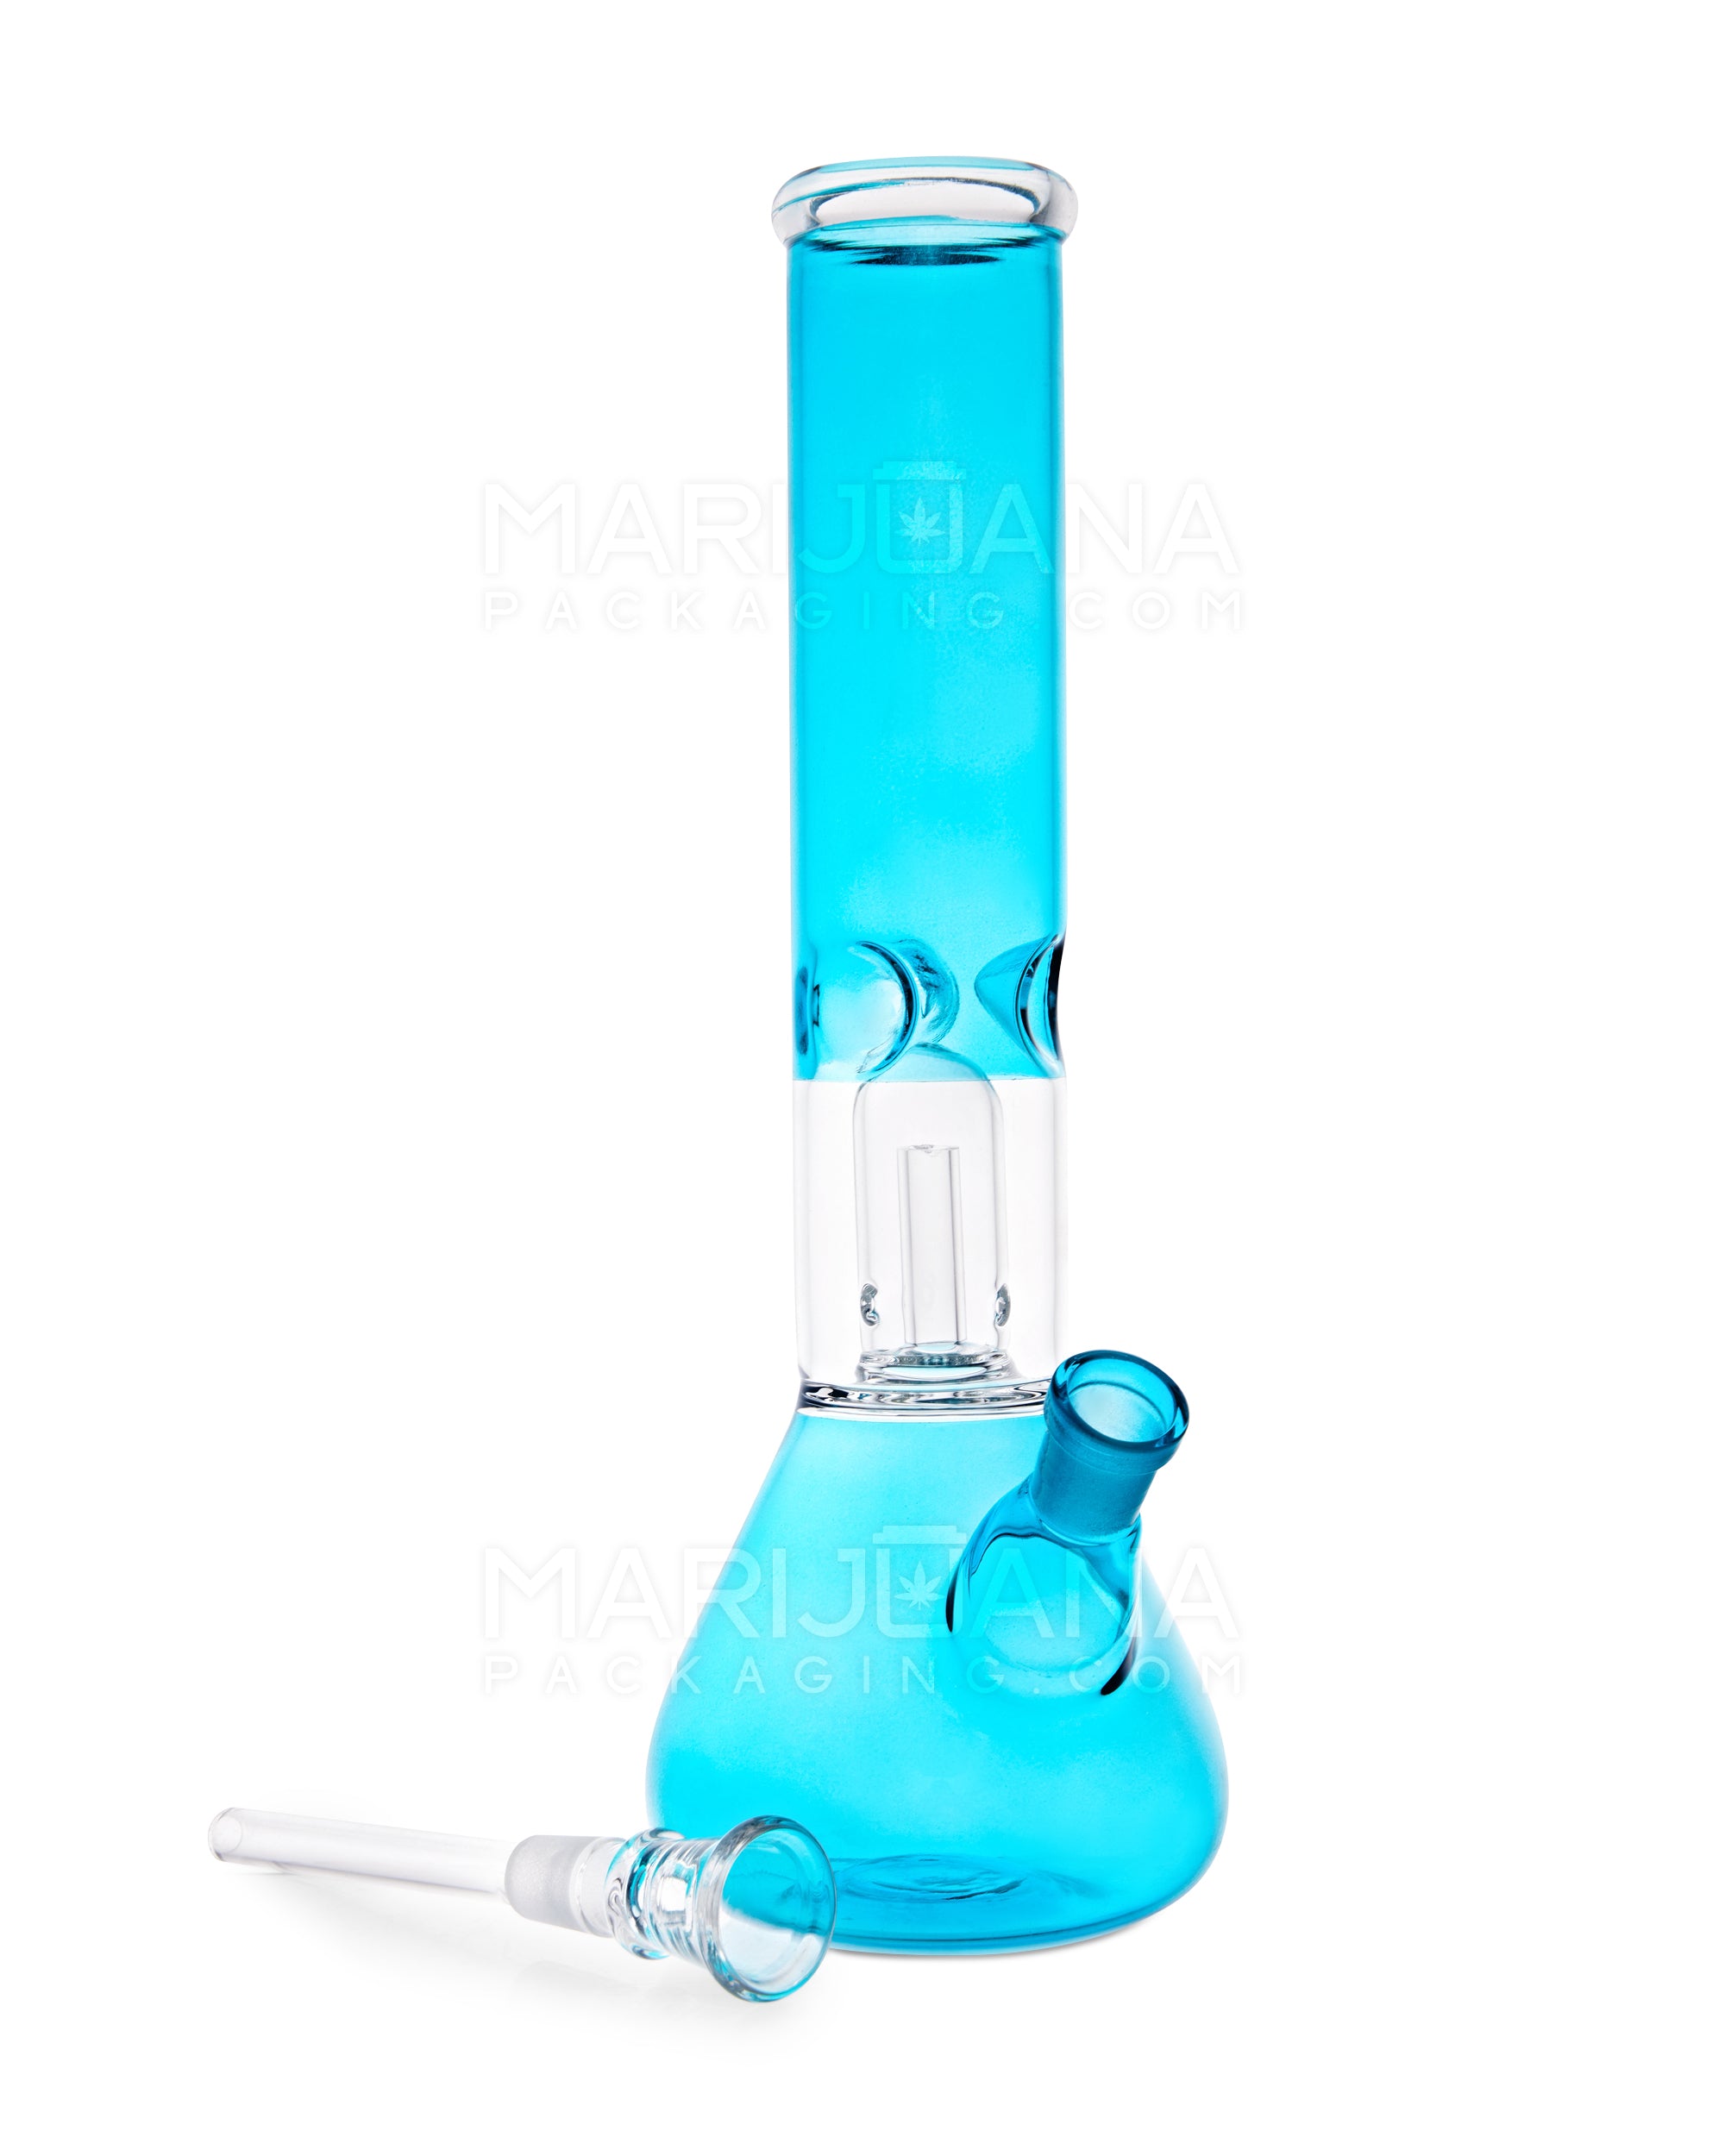 Straight Neck Showerhead Perc Glass Beaker Water Pipe w/ Ice Catcher | 10in Tall - 14mm Bowl - Blue